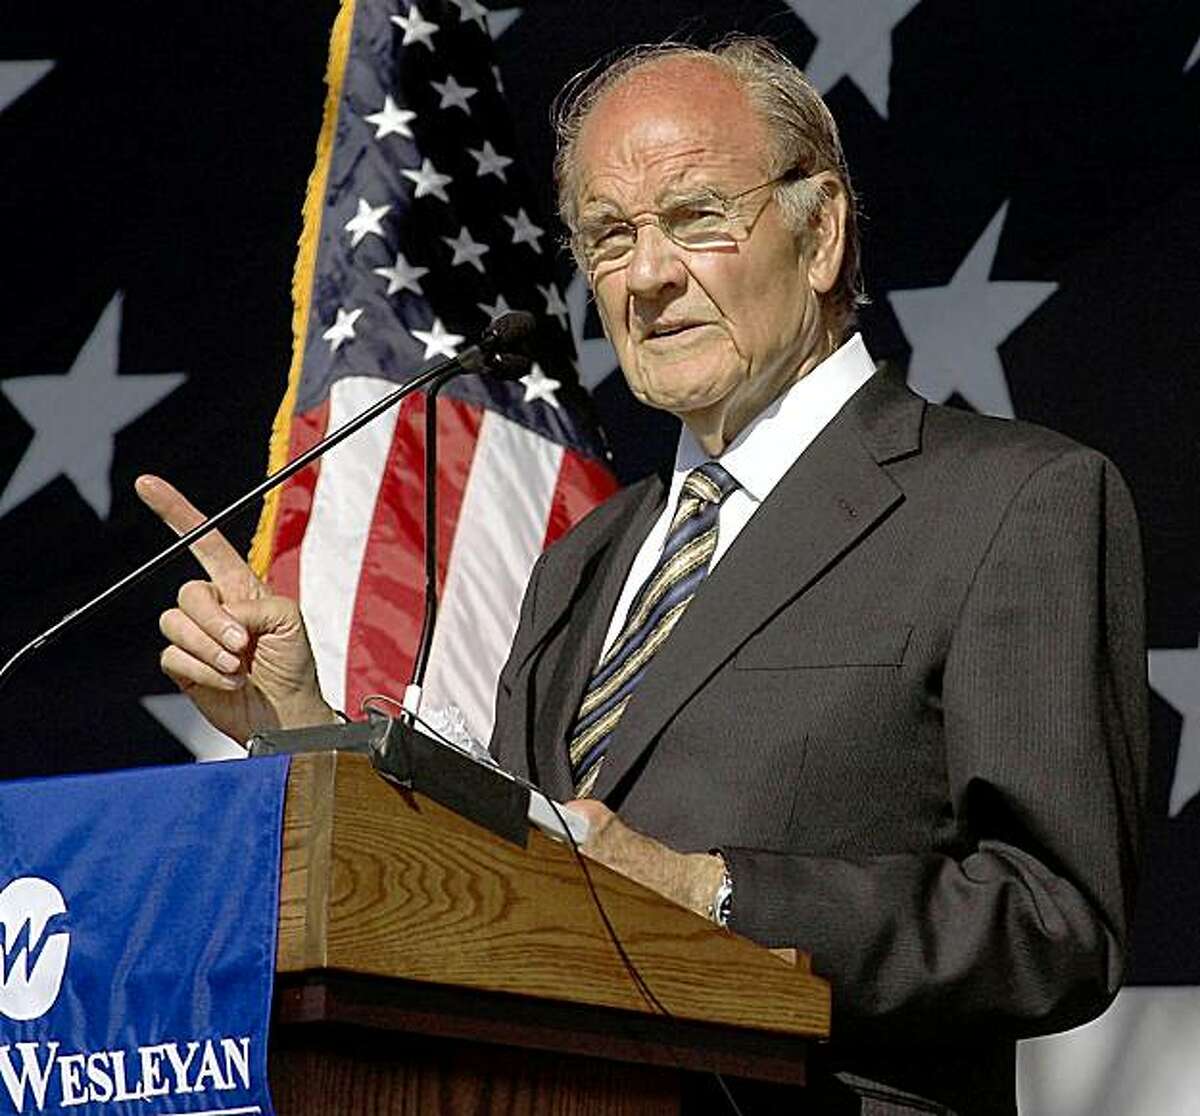 ** ADVANCE FOR SUNDAY, OCT. 29 **Former U.S. Sen. George McGovern, 84, speaks at the dedication of the George and Eleanor McGovern Library Saturday, Oct. 7, 2006 in Mitchell, S.D. (AP Photo/Doug Dreyer)